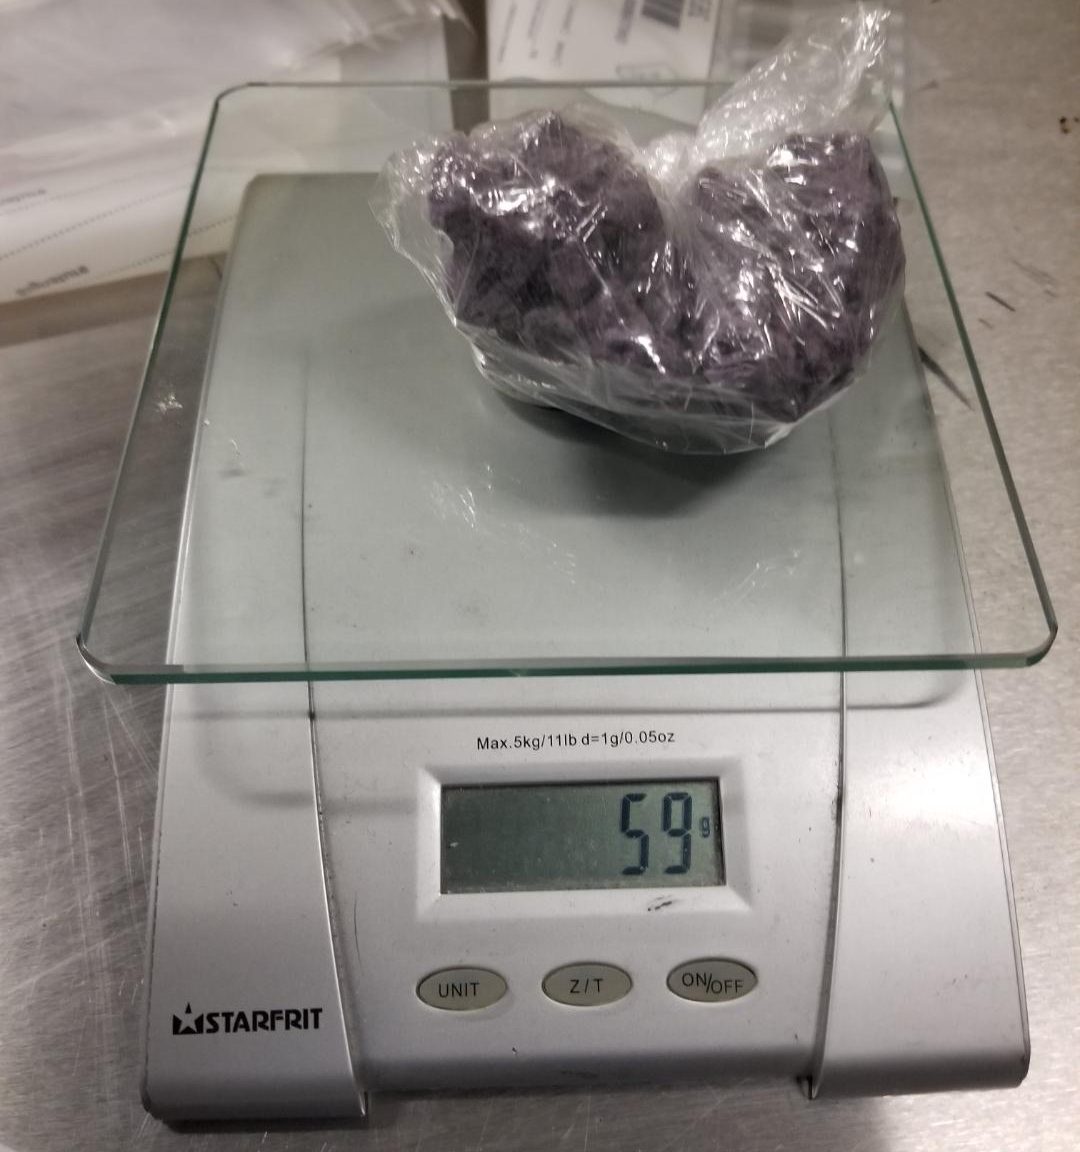 OPP seized fentanyl and cocaine during a vehicle stop in Peterborough on Thursday night.